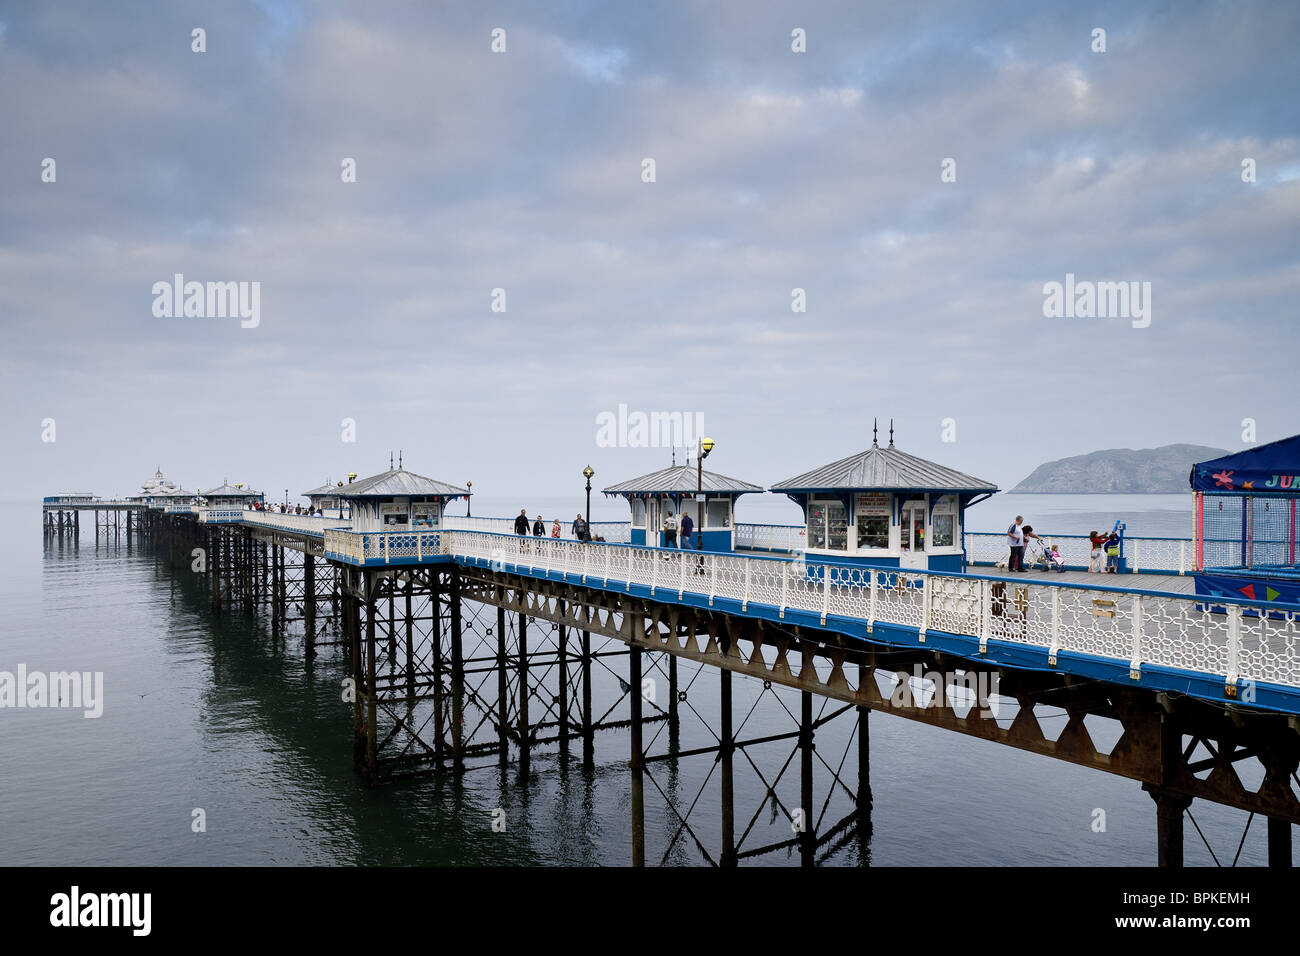 View of the 670 meters long Victorian pier, the most prominent landmark of the seaside resort town of Llandudno, Conwy County Bo Stock Photo